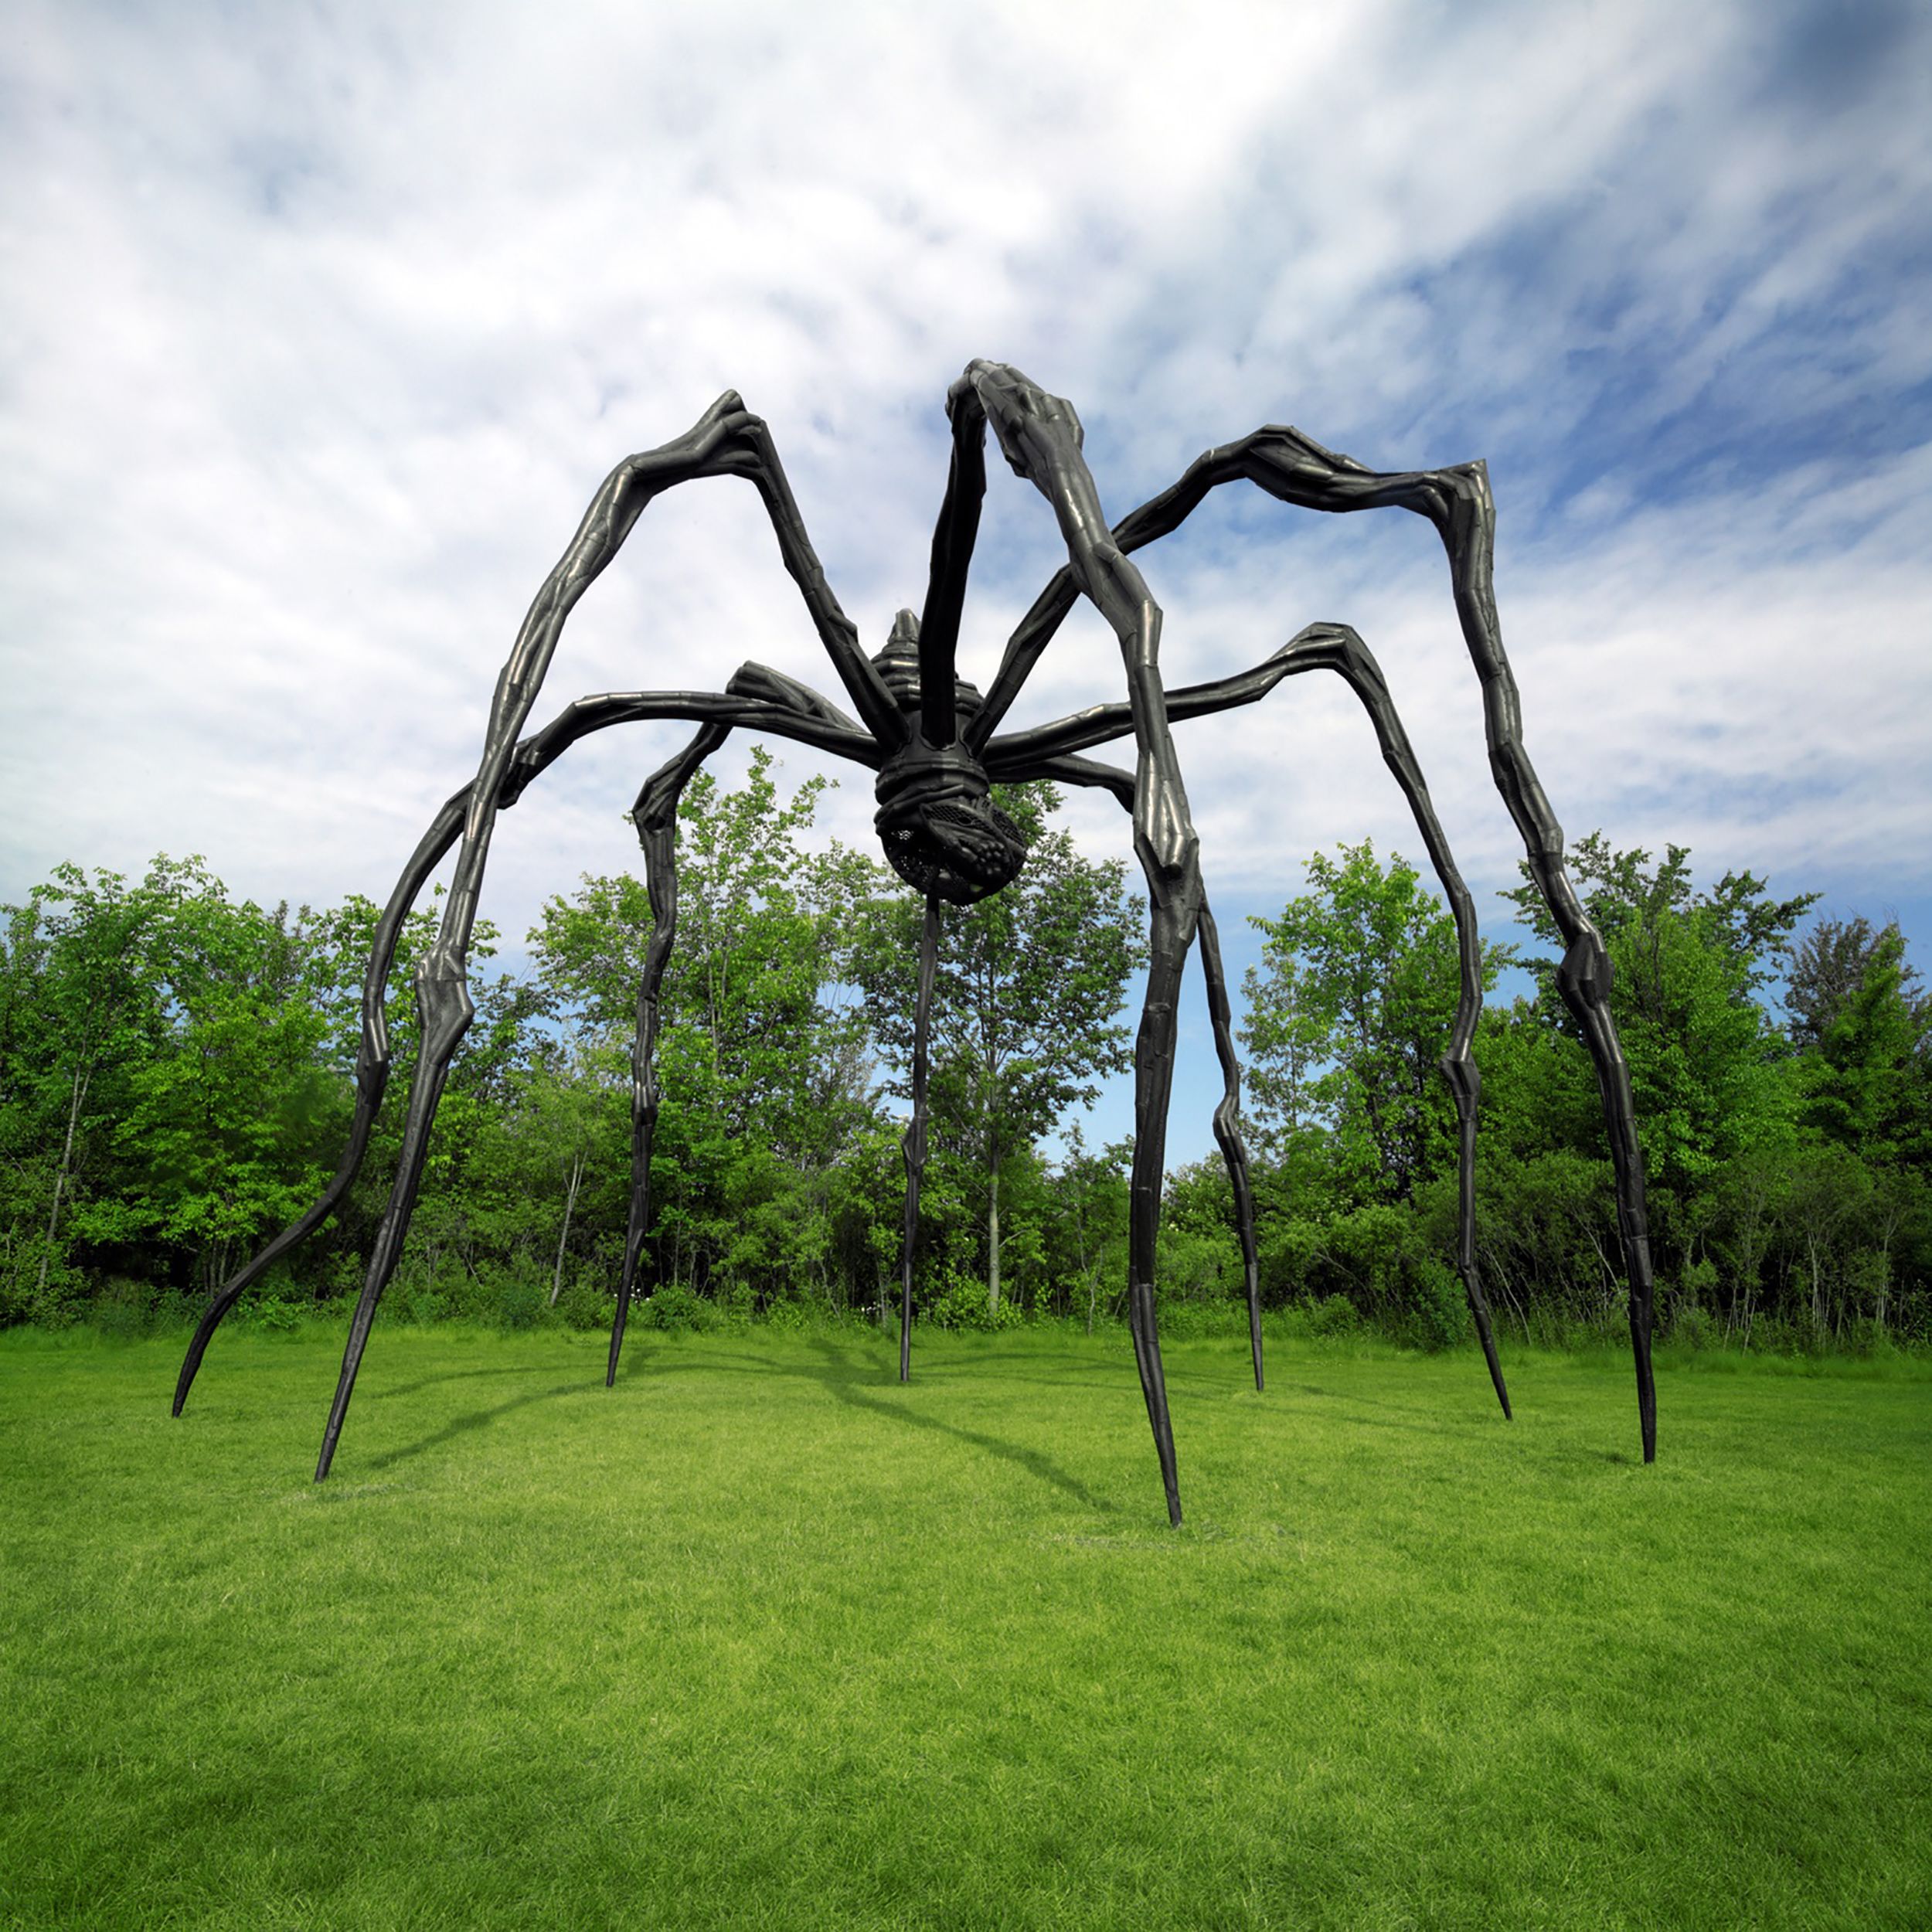 Louise Bourgeois, Spider Woman